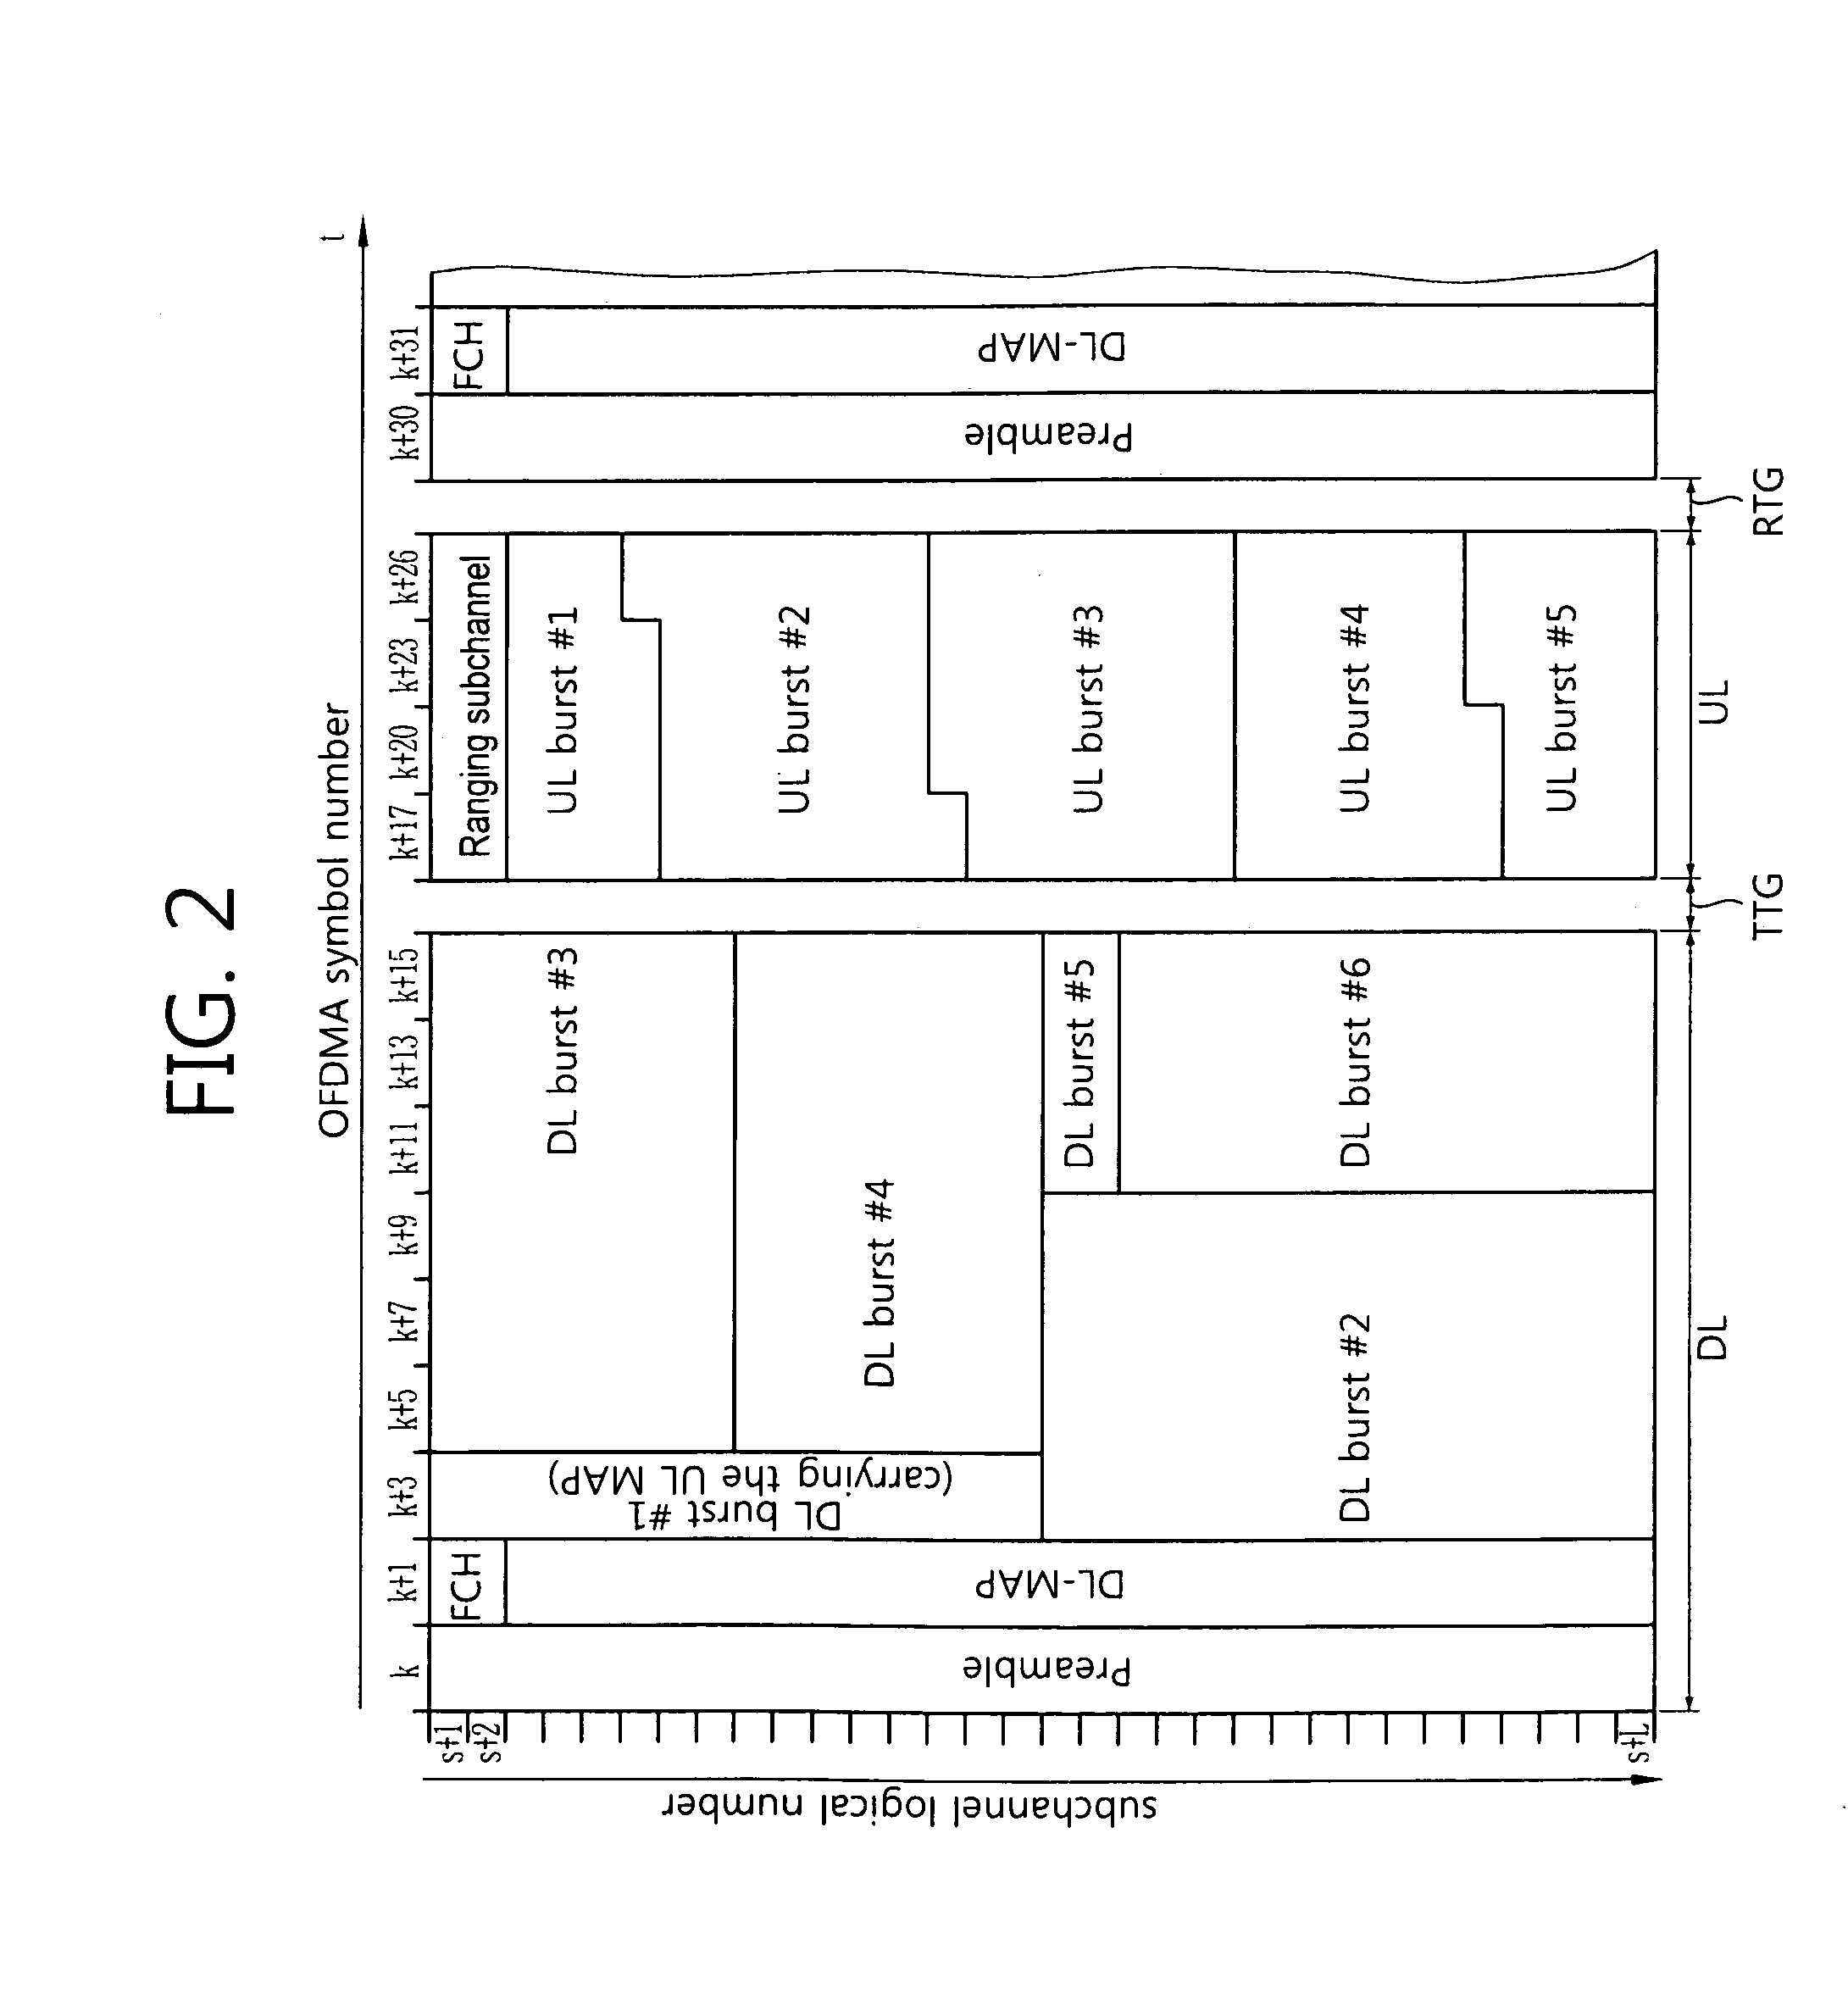 Method and apparatus of transmitting feedback message in wireless communication system